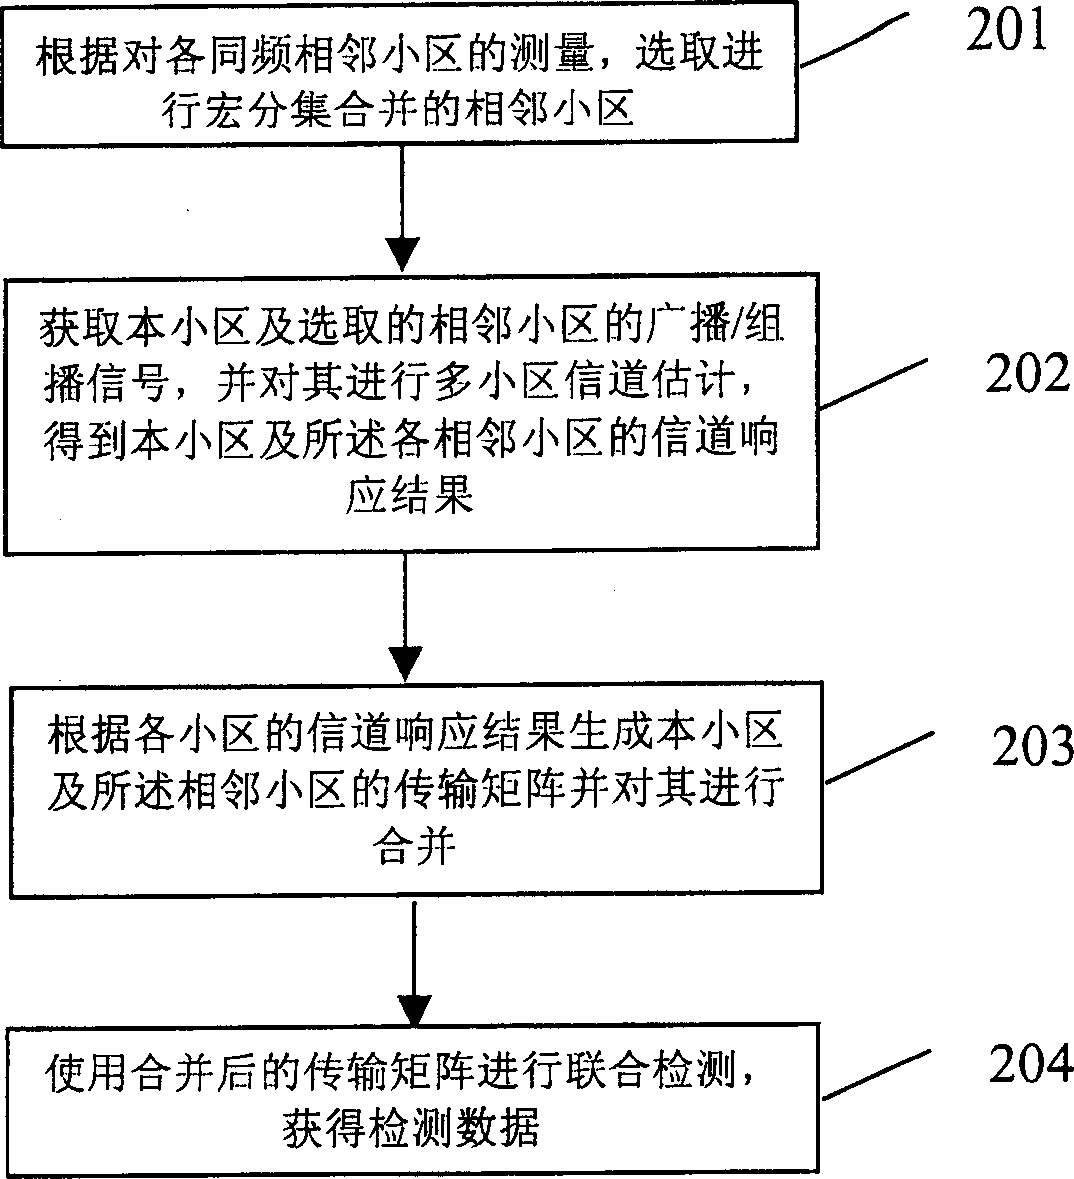 Combination testing method for shared frequency broadcasting/multicasting